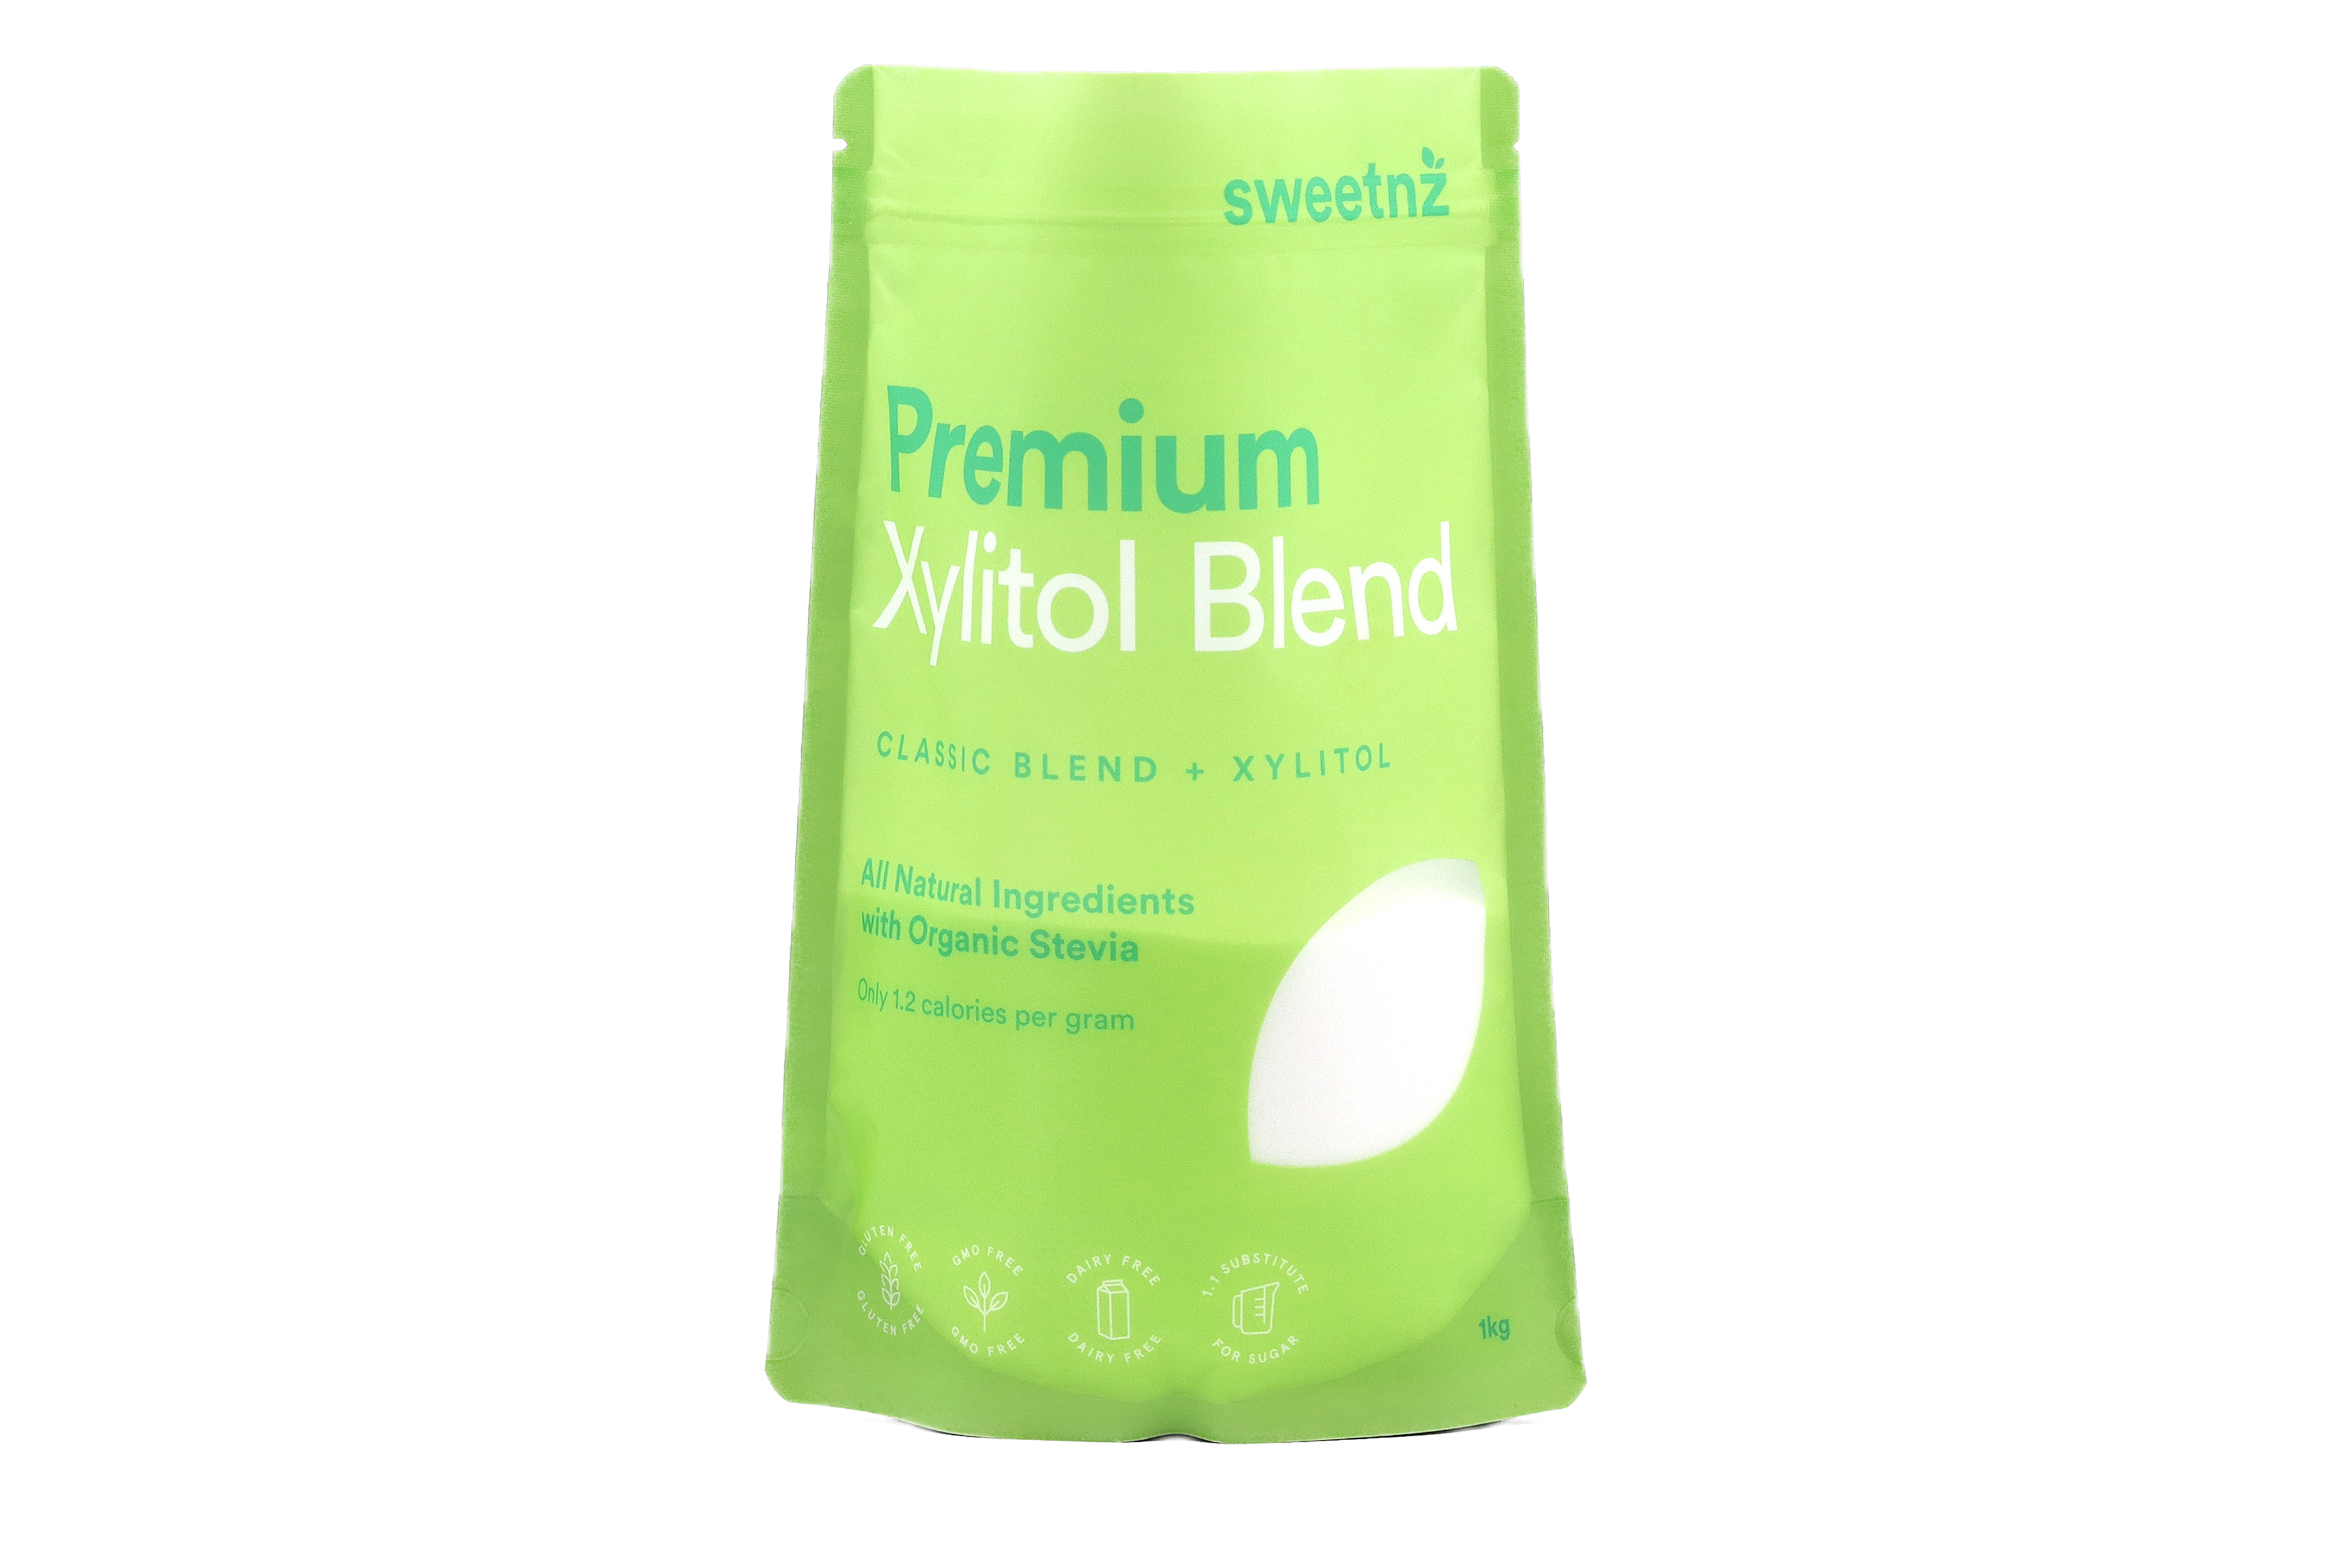 1kg Premium Xylitol Blend - made by blending Classic Not Sugar and Xylitol.